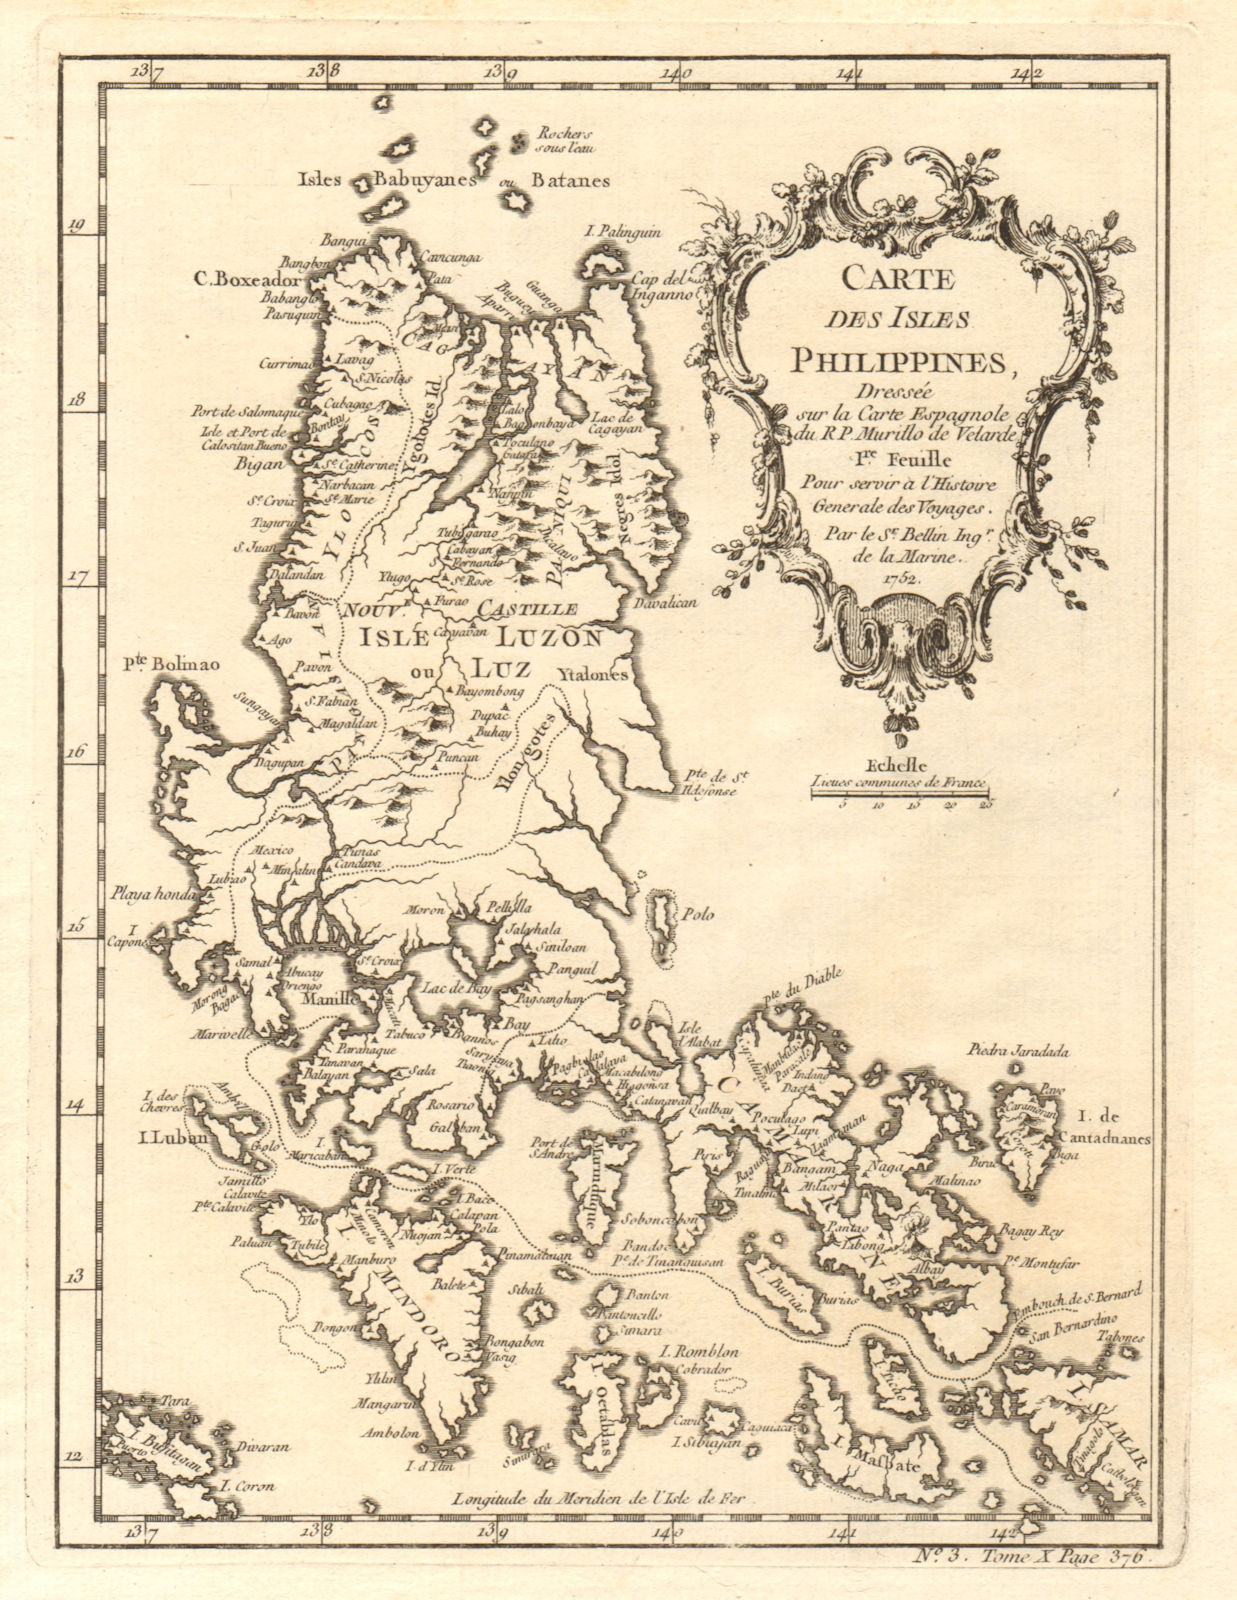 'Carte des Isles Philippines 1re feuille'. North. Luzon Mindoro. BELLIN 1752 map